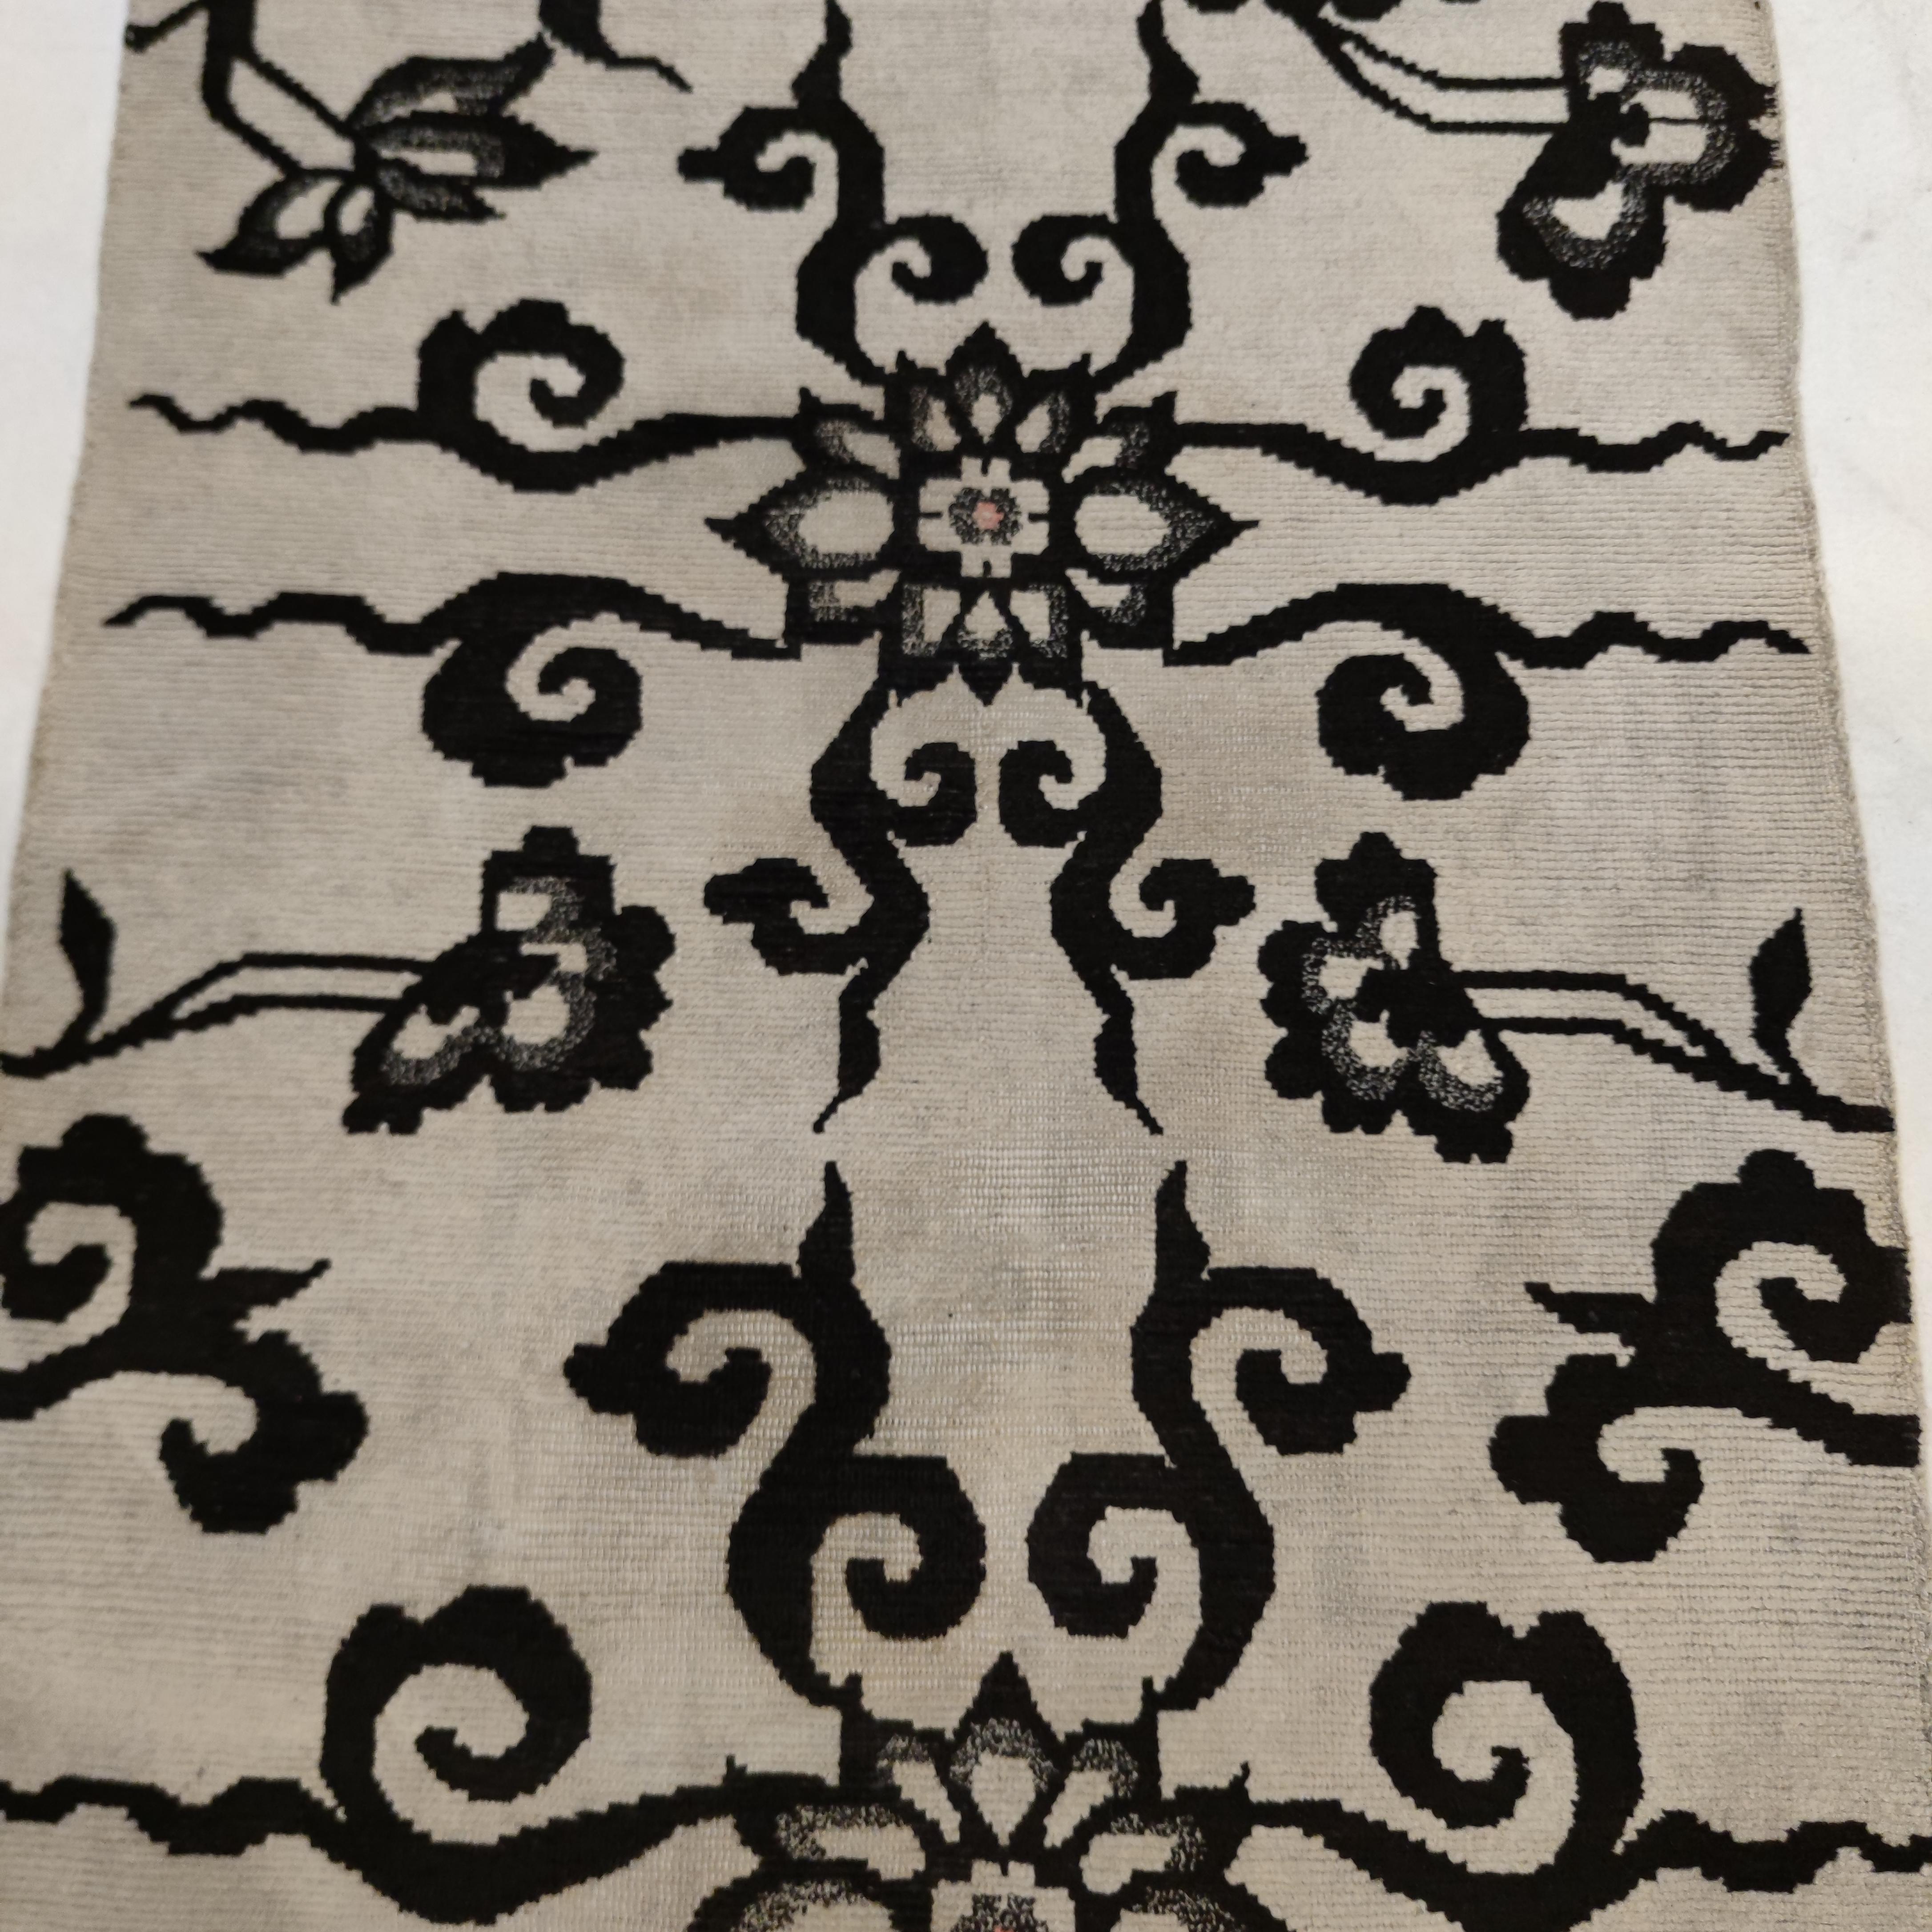 Antique White Ground Tibetan Khaden Rug with Black Lotus Flowers and Tendrils 1